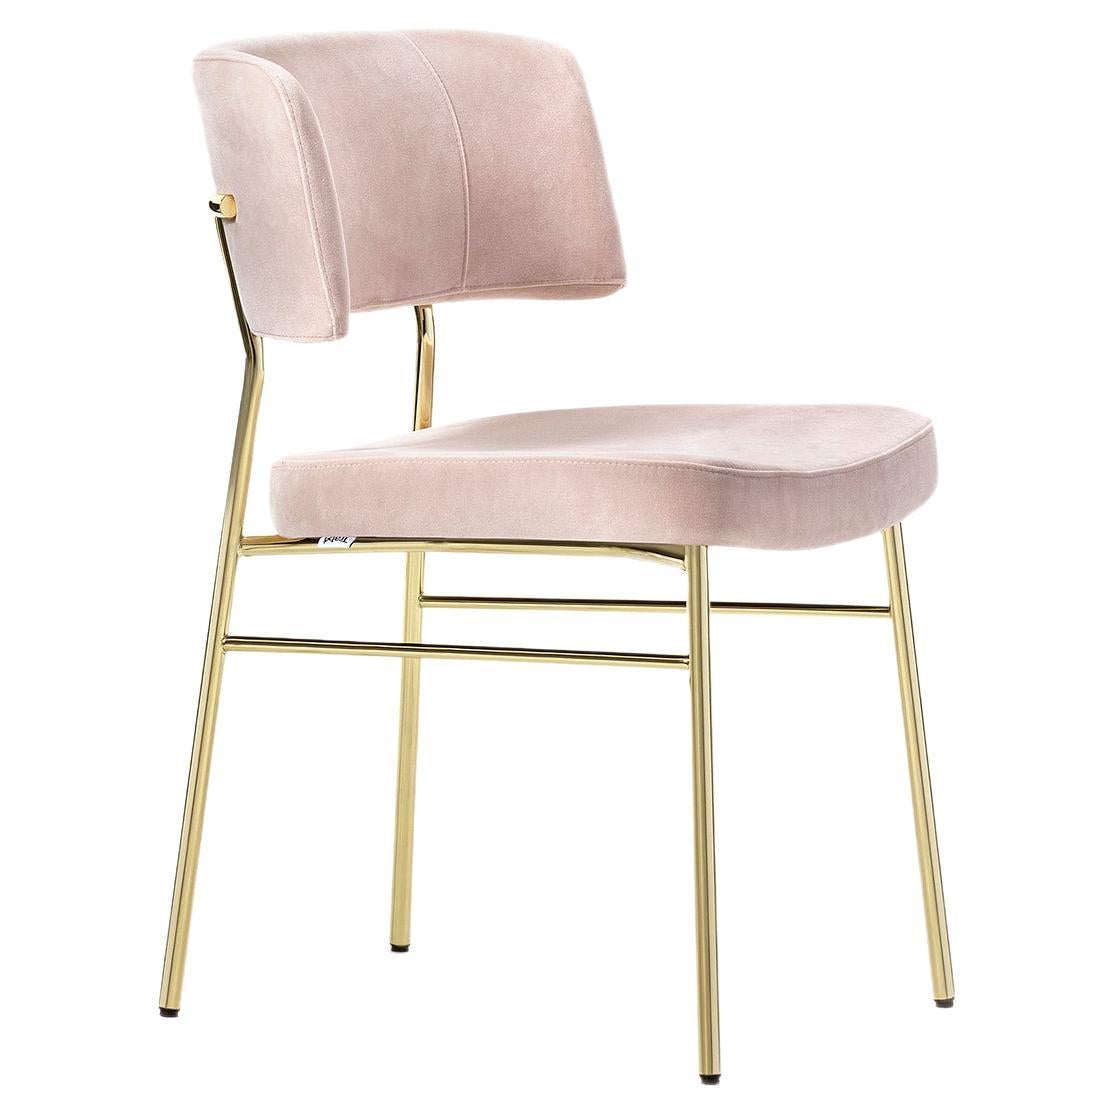 Marlen 0161 Chair, Rose, Indoor, Chair, Brass Shiny, Home, Contract, Living